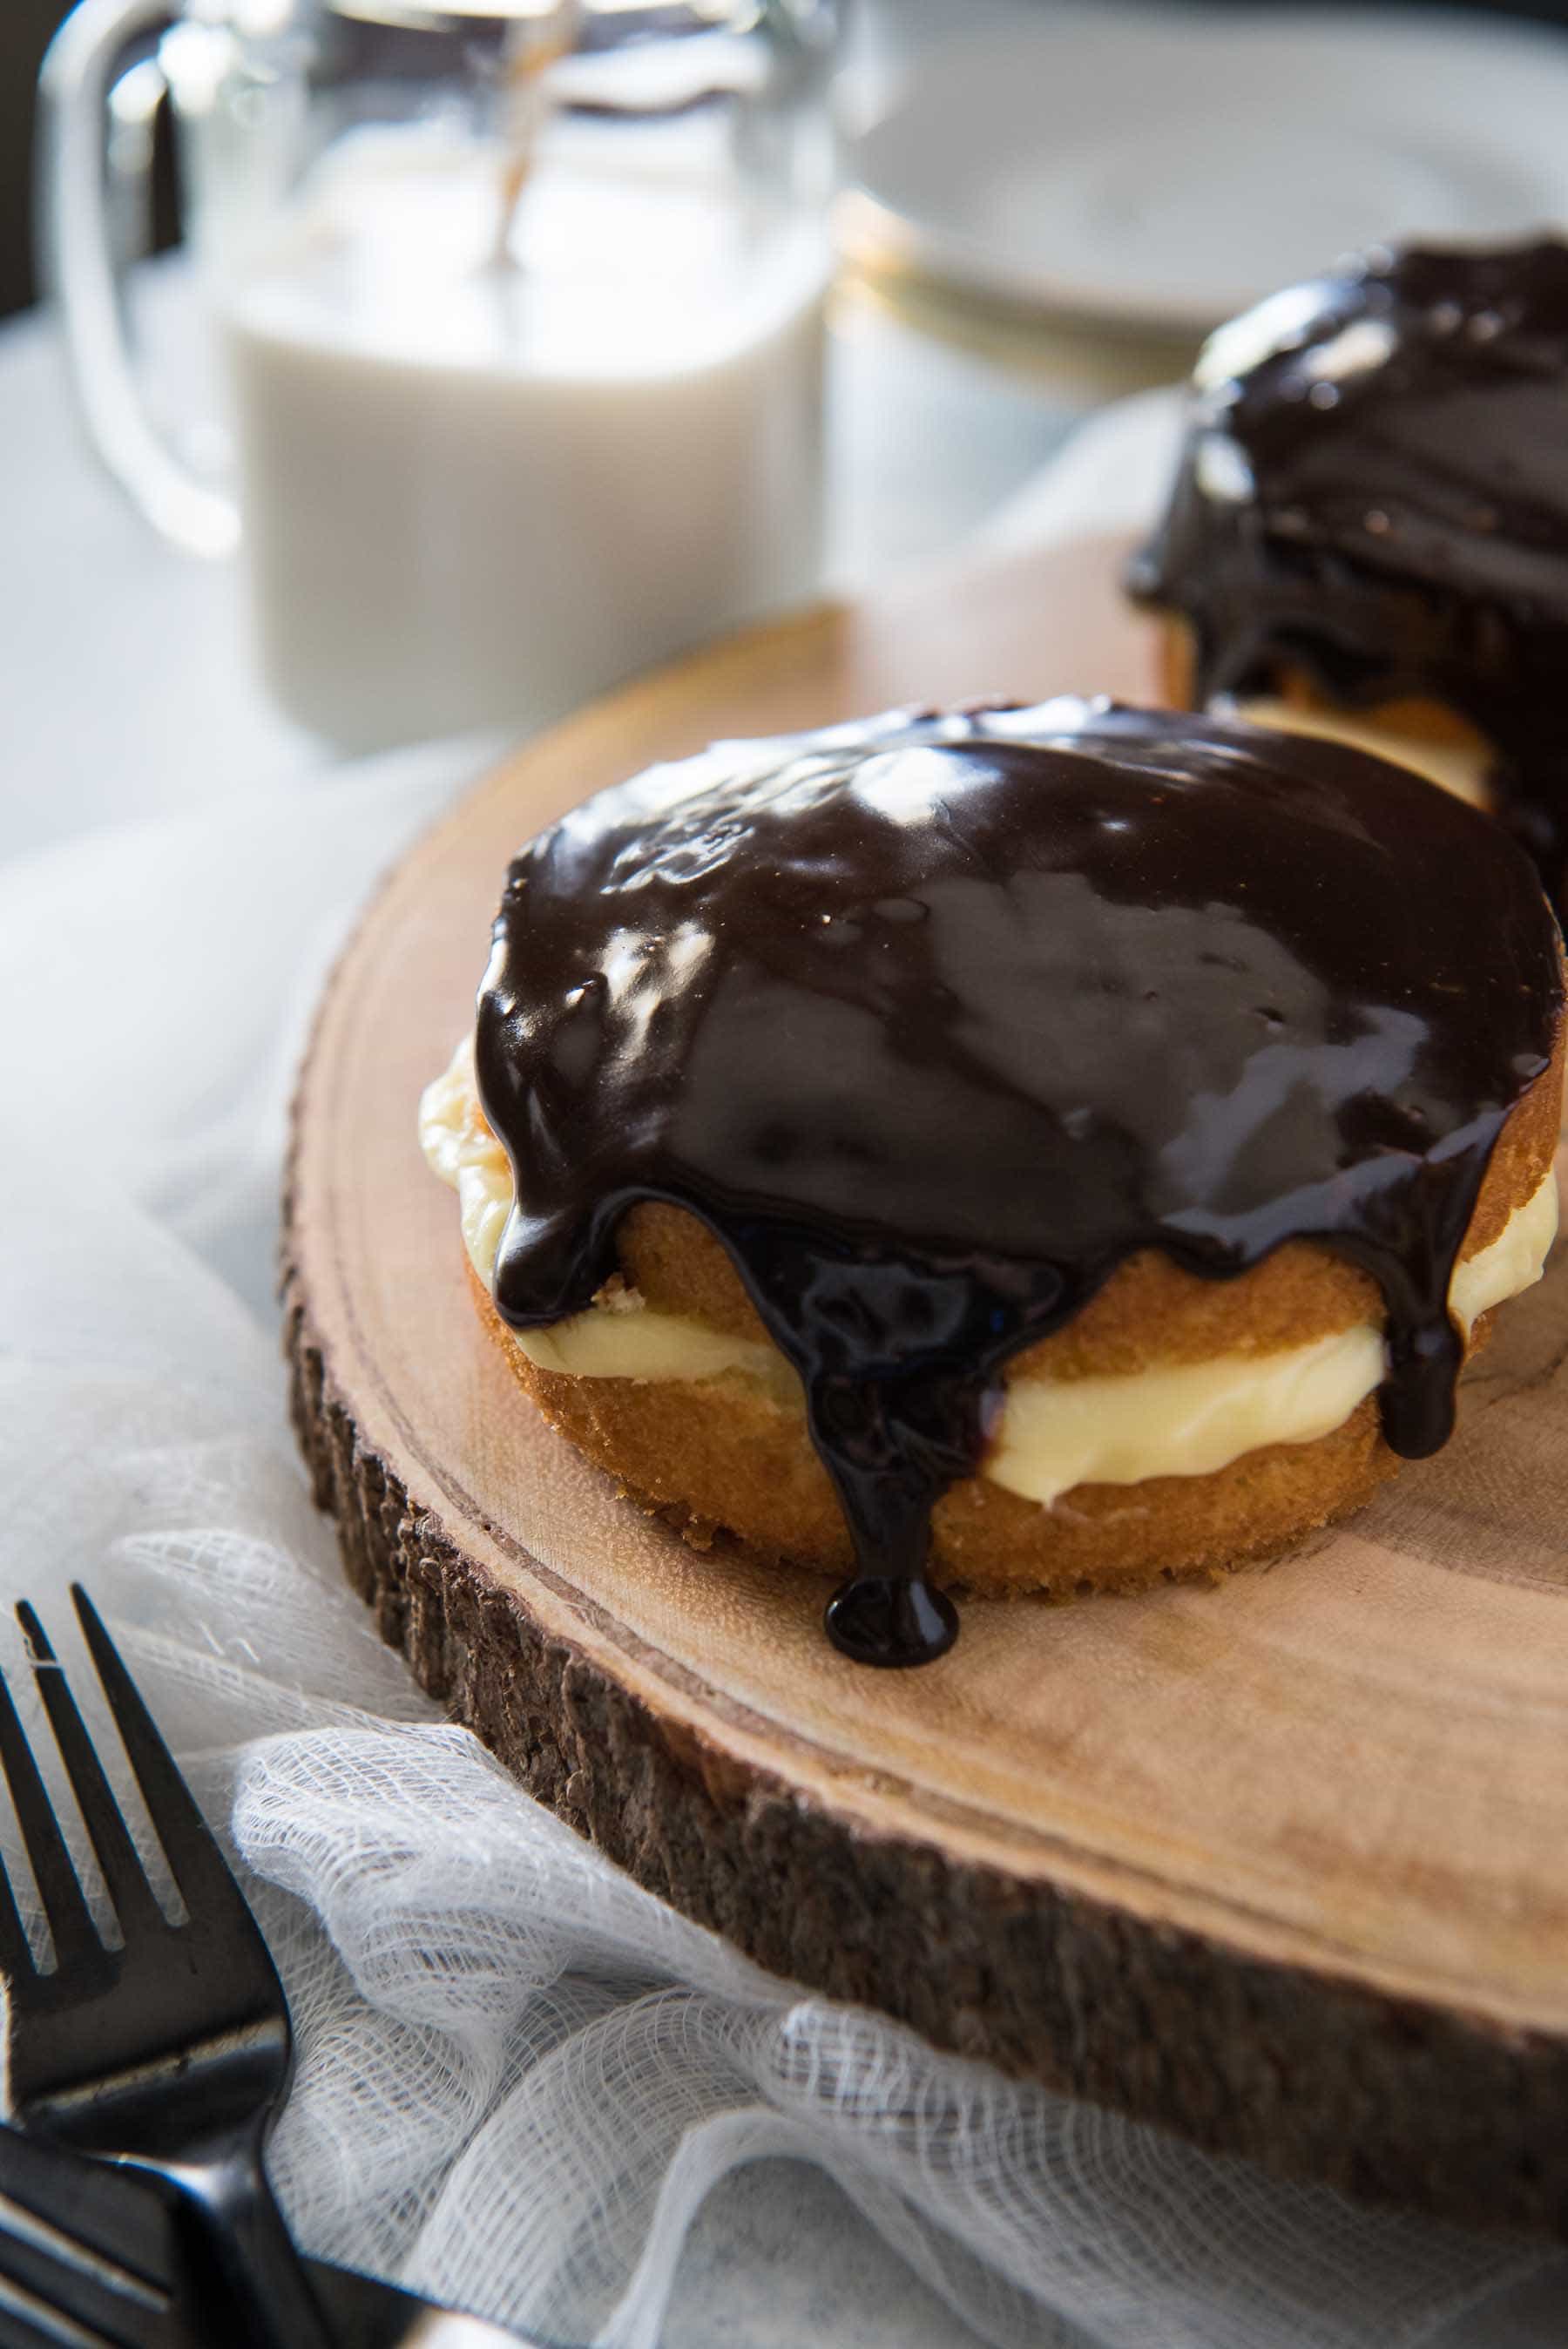 There's nothing quite like a classic Boston Cream Pie...since it's actually a cake! Rich, thick pastry cream is sandwiched between two layers of buttery yellow cake, then topped with a dark chocolate glaze.